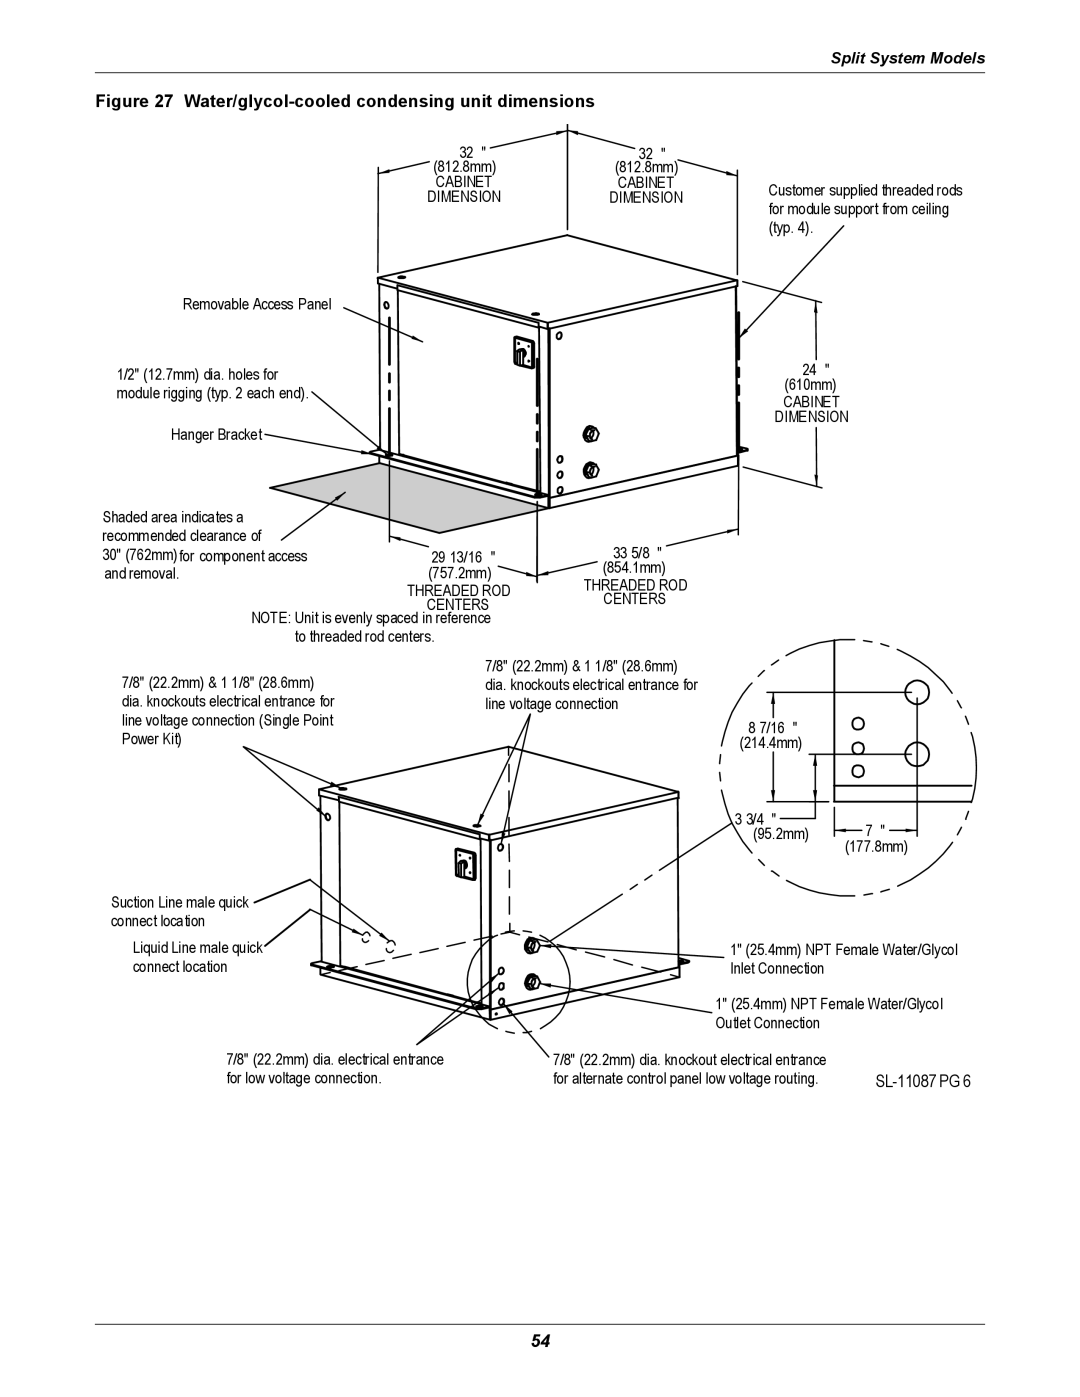 Liebert ITR installation manual Water/glycol-cooled condensing unit dimensions 